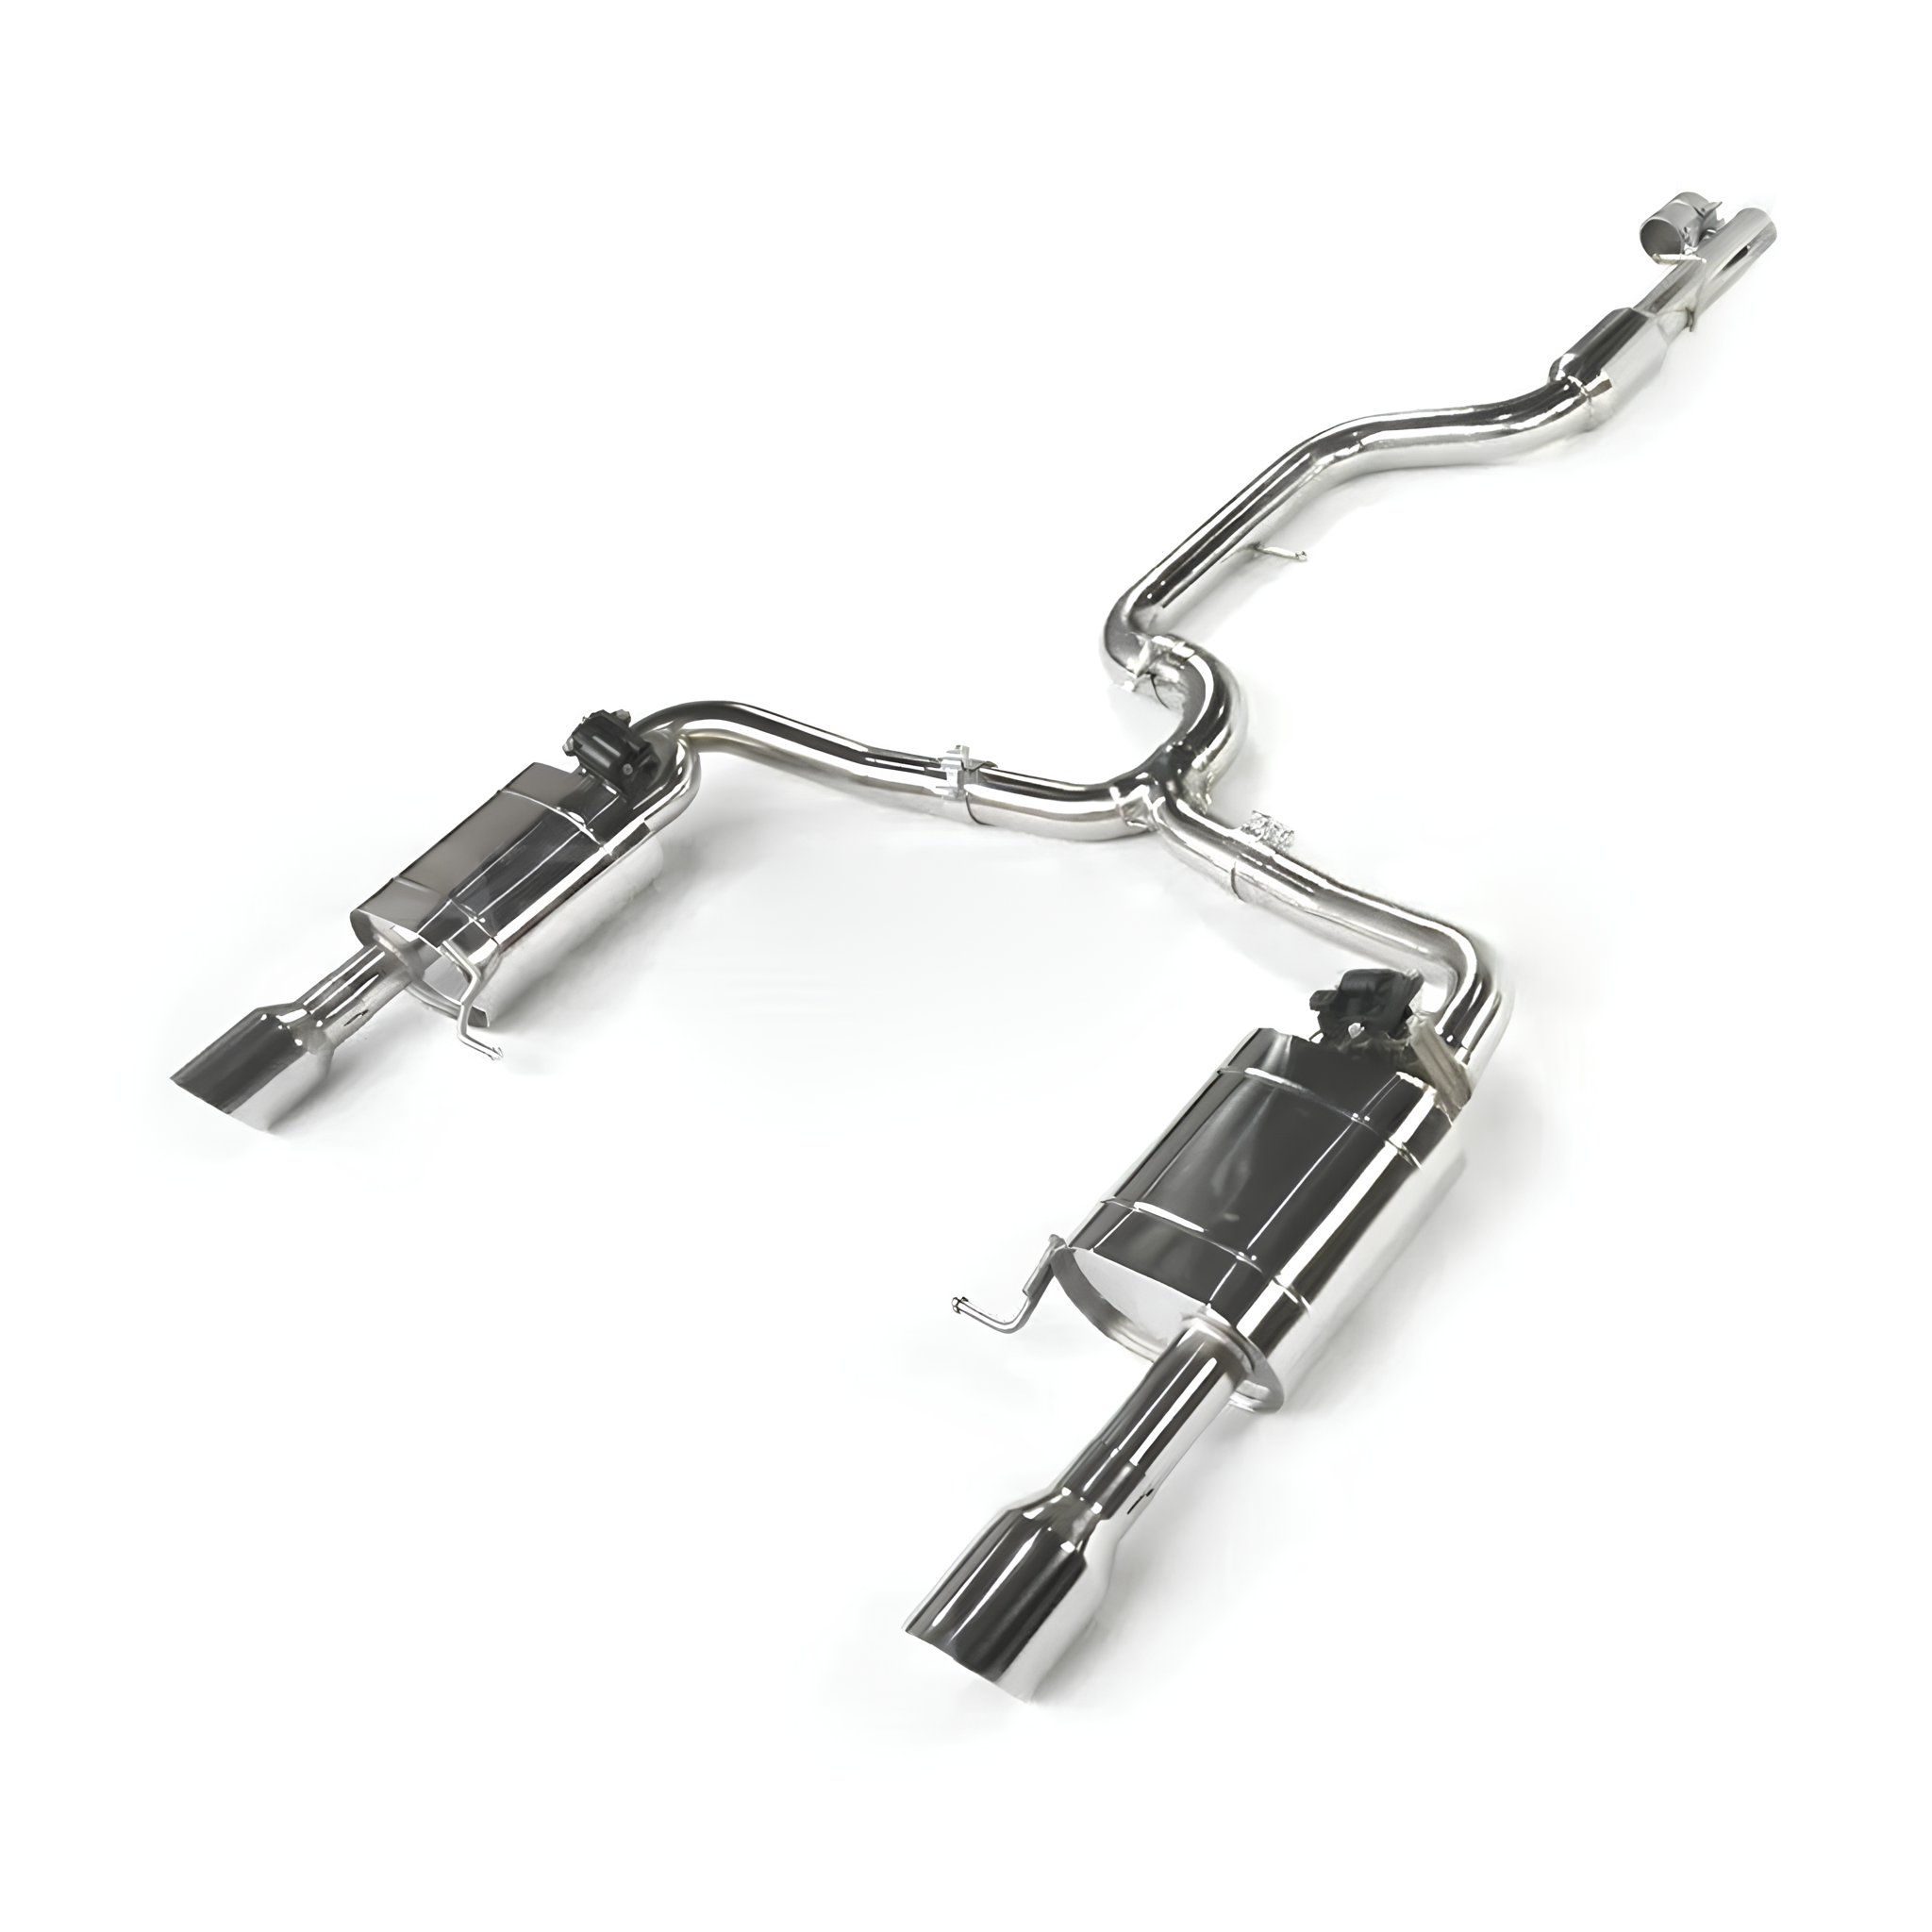 Rstype Valvetronic EXHAUST CATBACK For For Volkswagen R36 Magotan 3.6 2008-2011 High quality Car Exhaust System